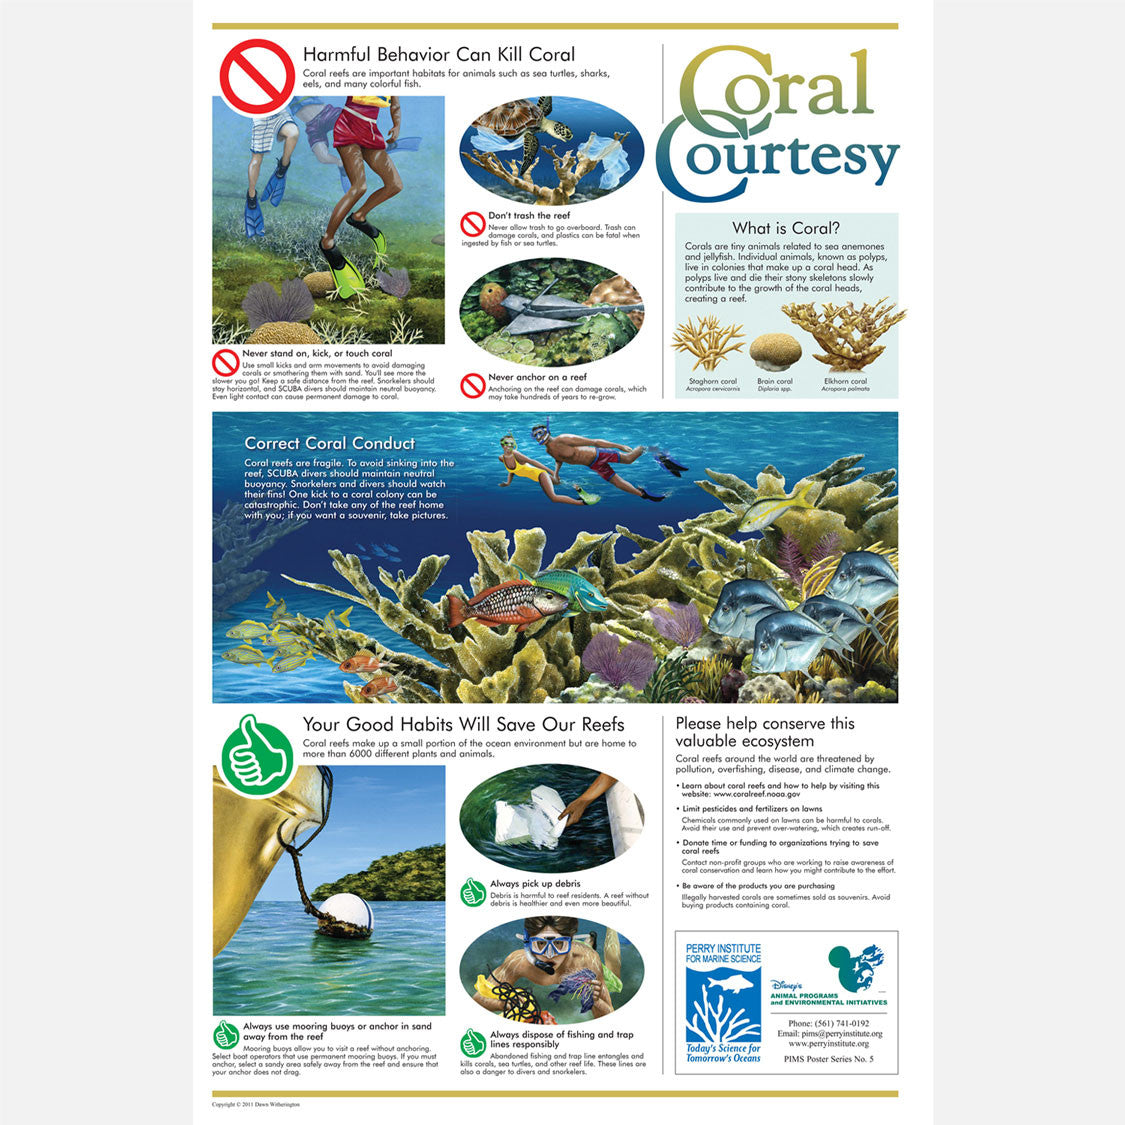 This beautiful poster provides information on the value of corals and the harmful effects human activity can have on them. 